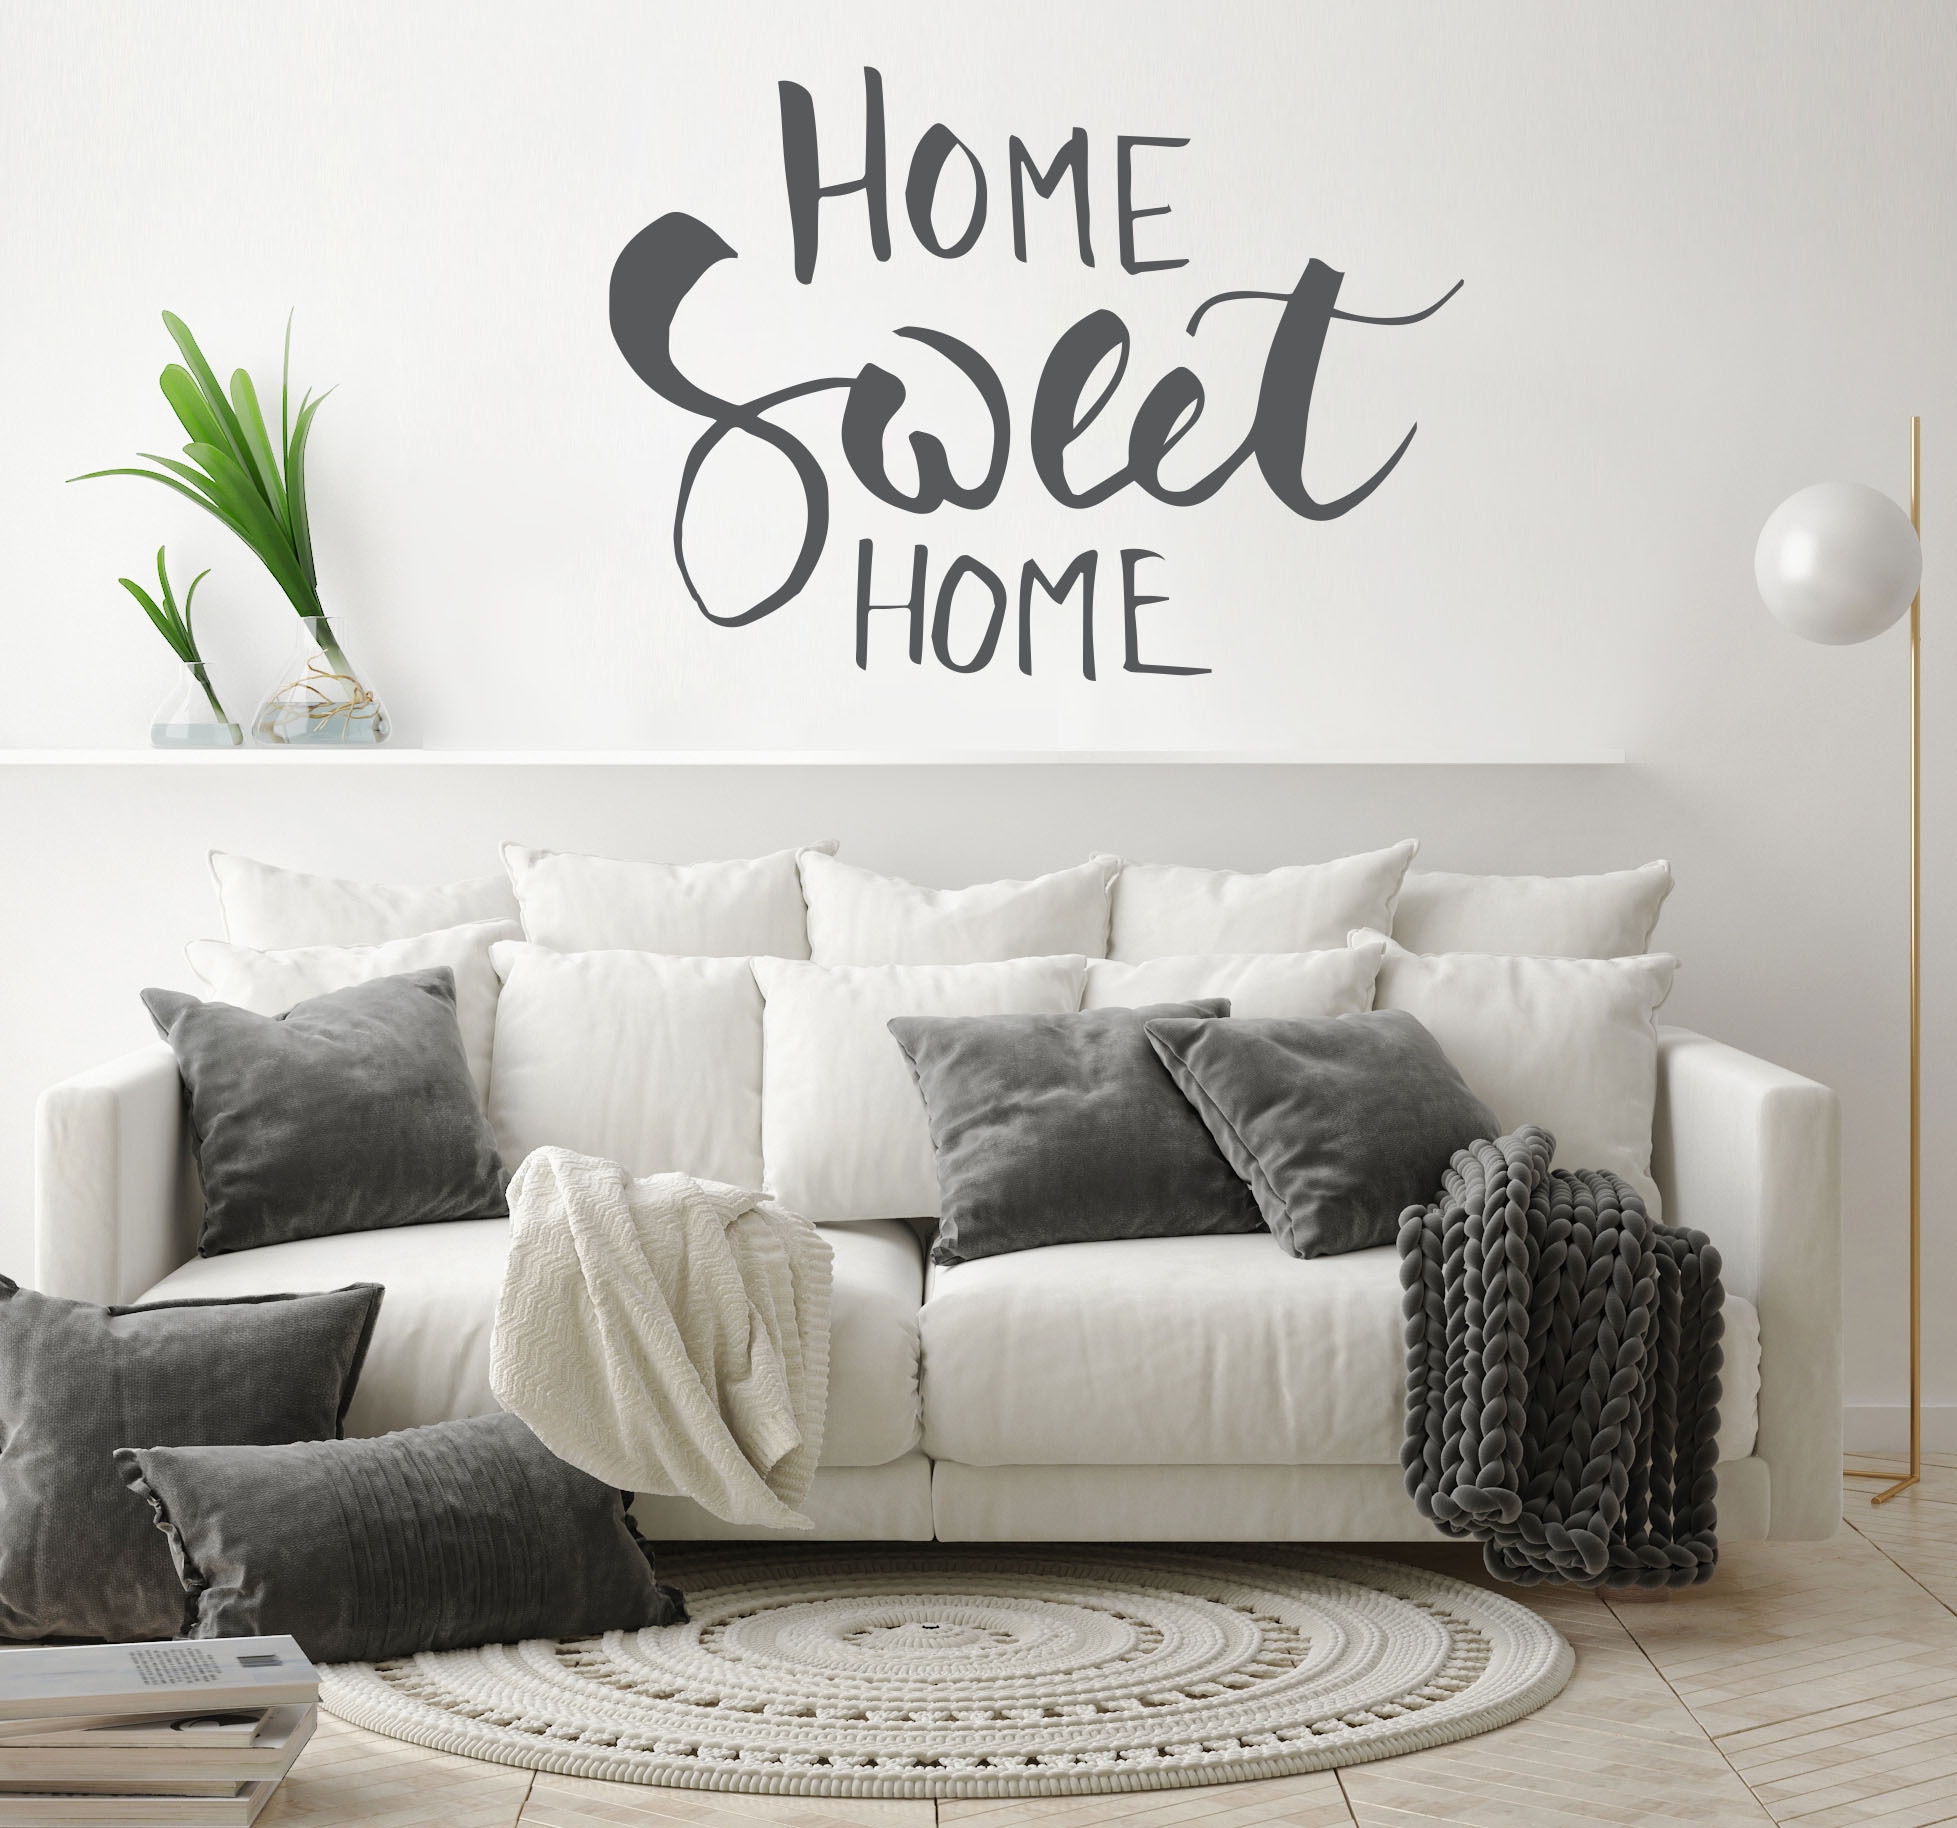 OTTO »HOME SWEET online Wandtattoo queence HOME«, (1 St.) bei